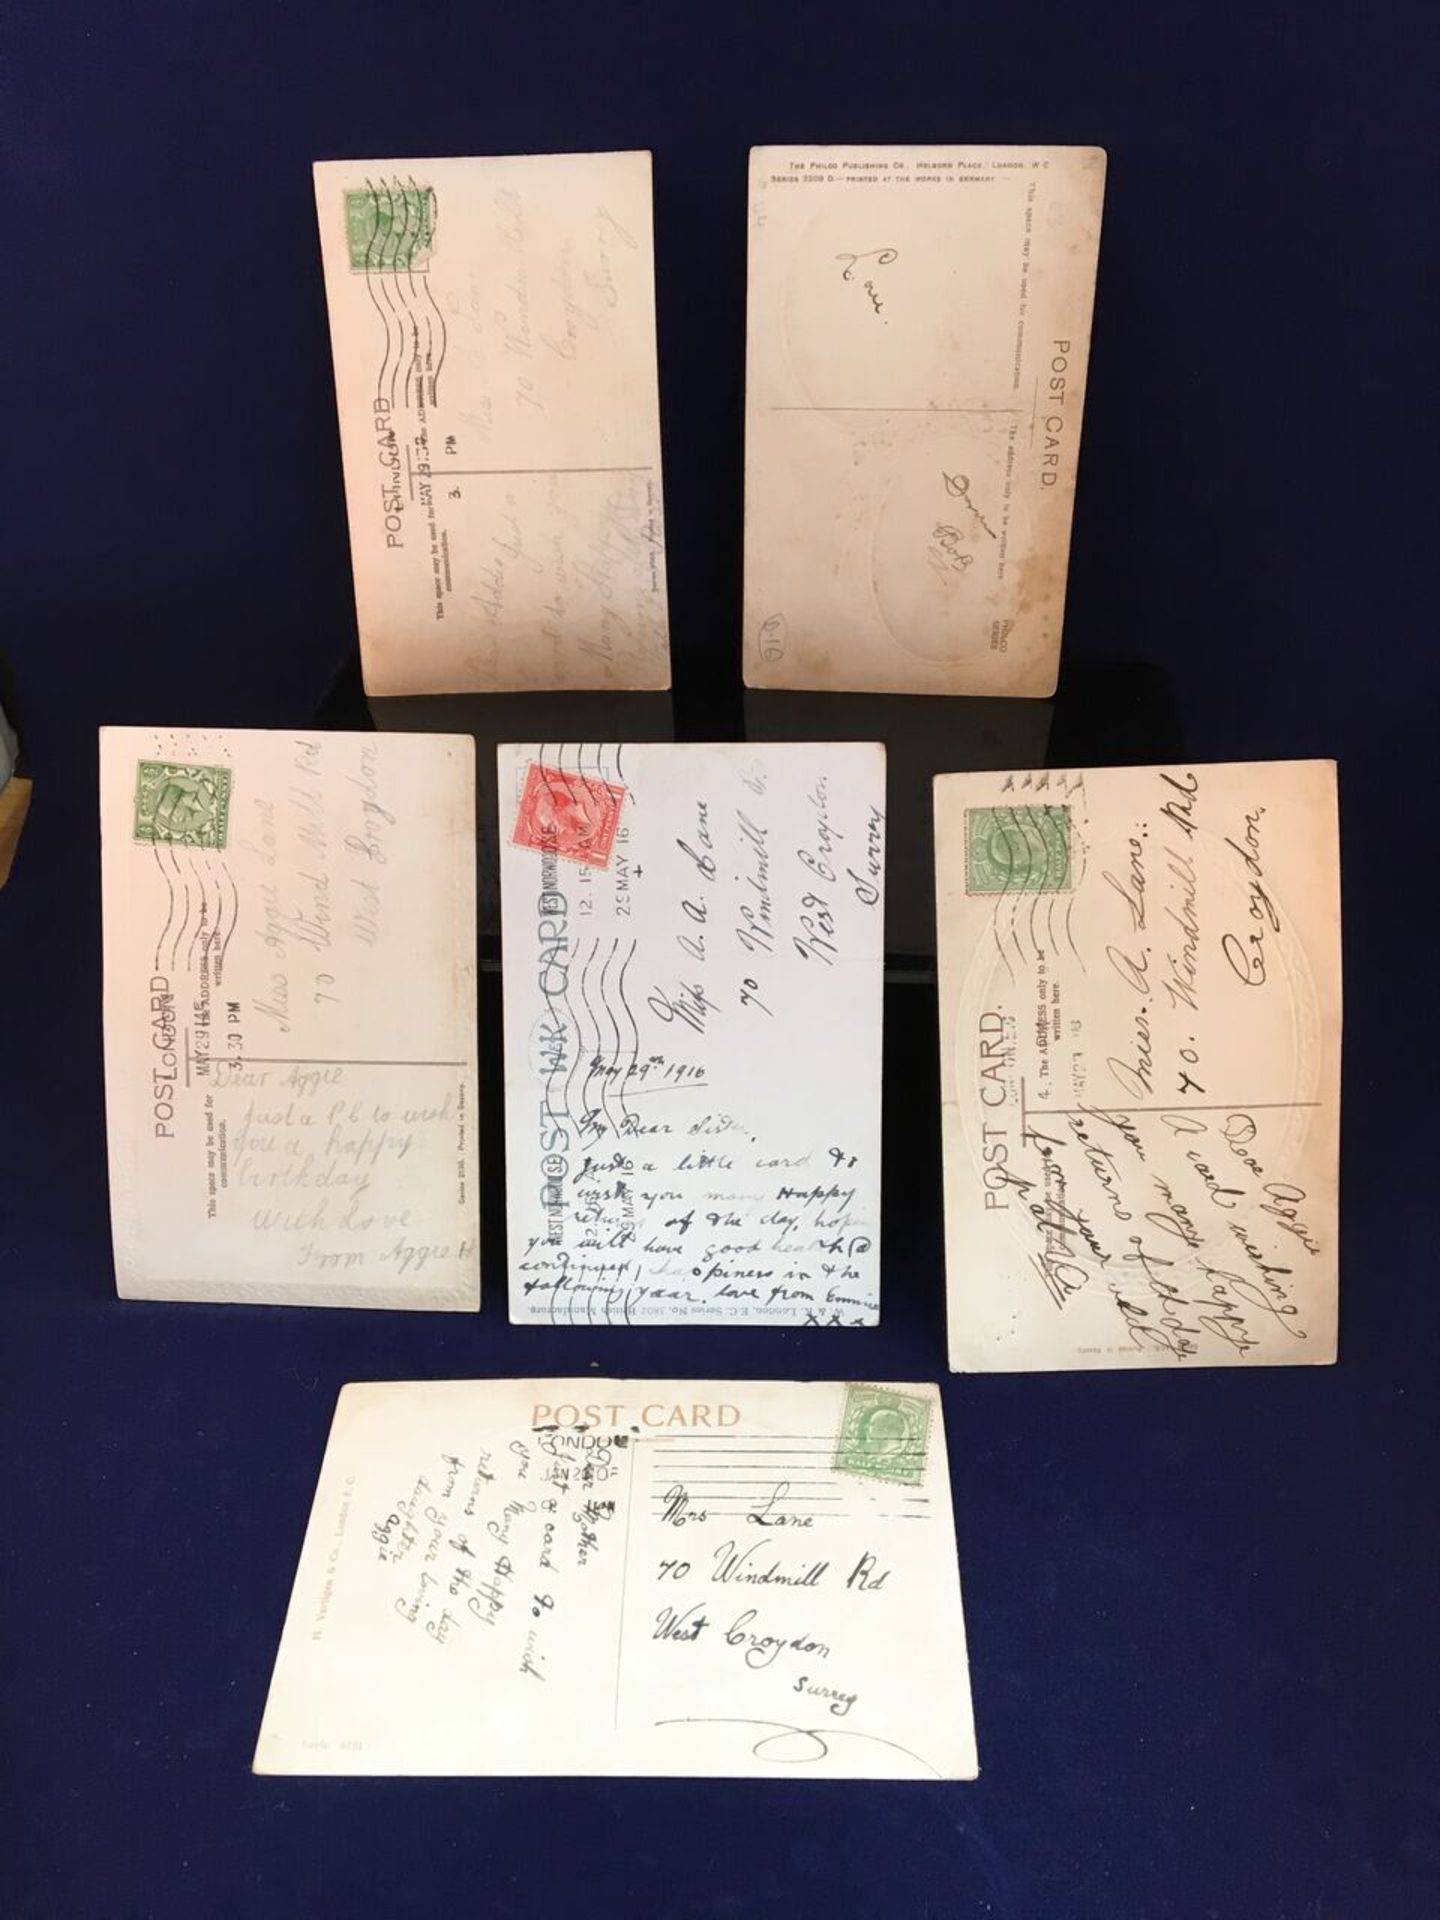 GROUP OF SIX ANTIQUE EARLY 20TH CENTURY POSTCARDS - GREETINGS OR BIRTHDAY TYPE. SOME WITH STAMPS. - Image 2 of 2